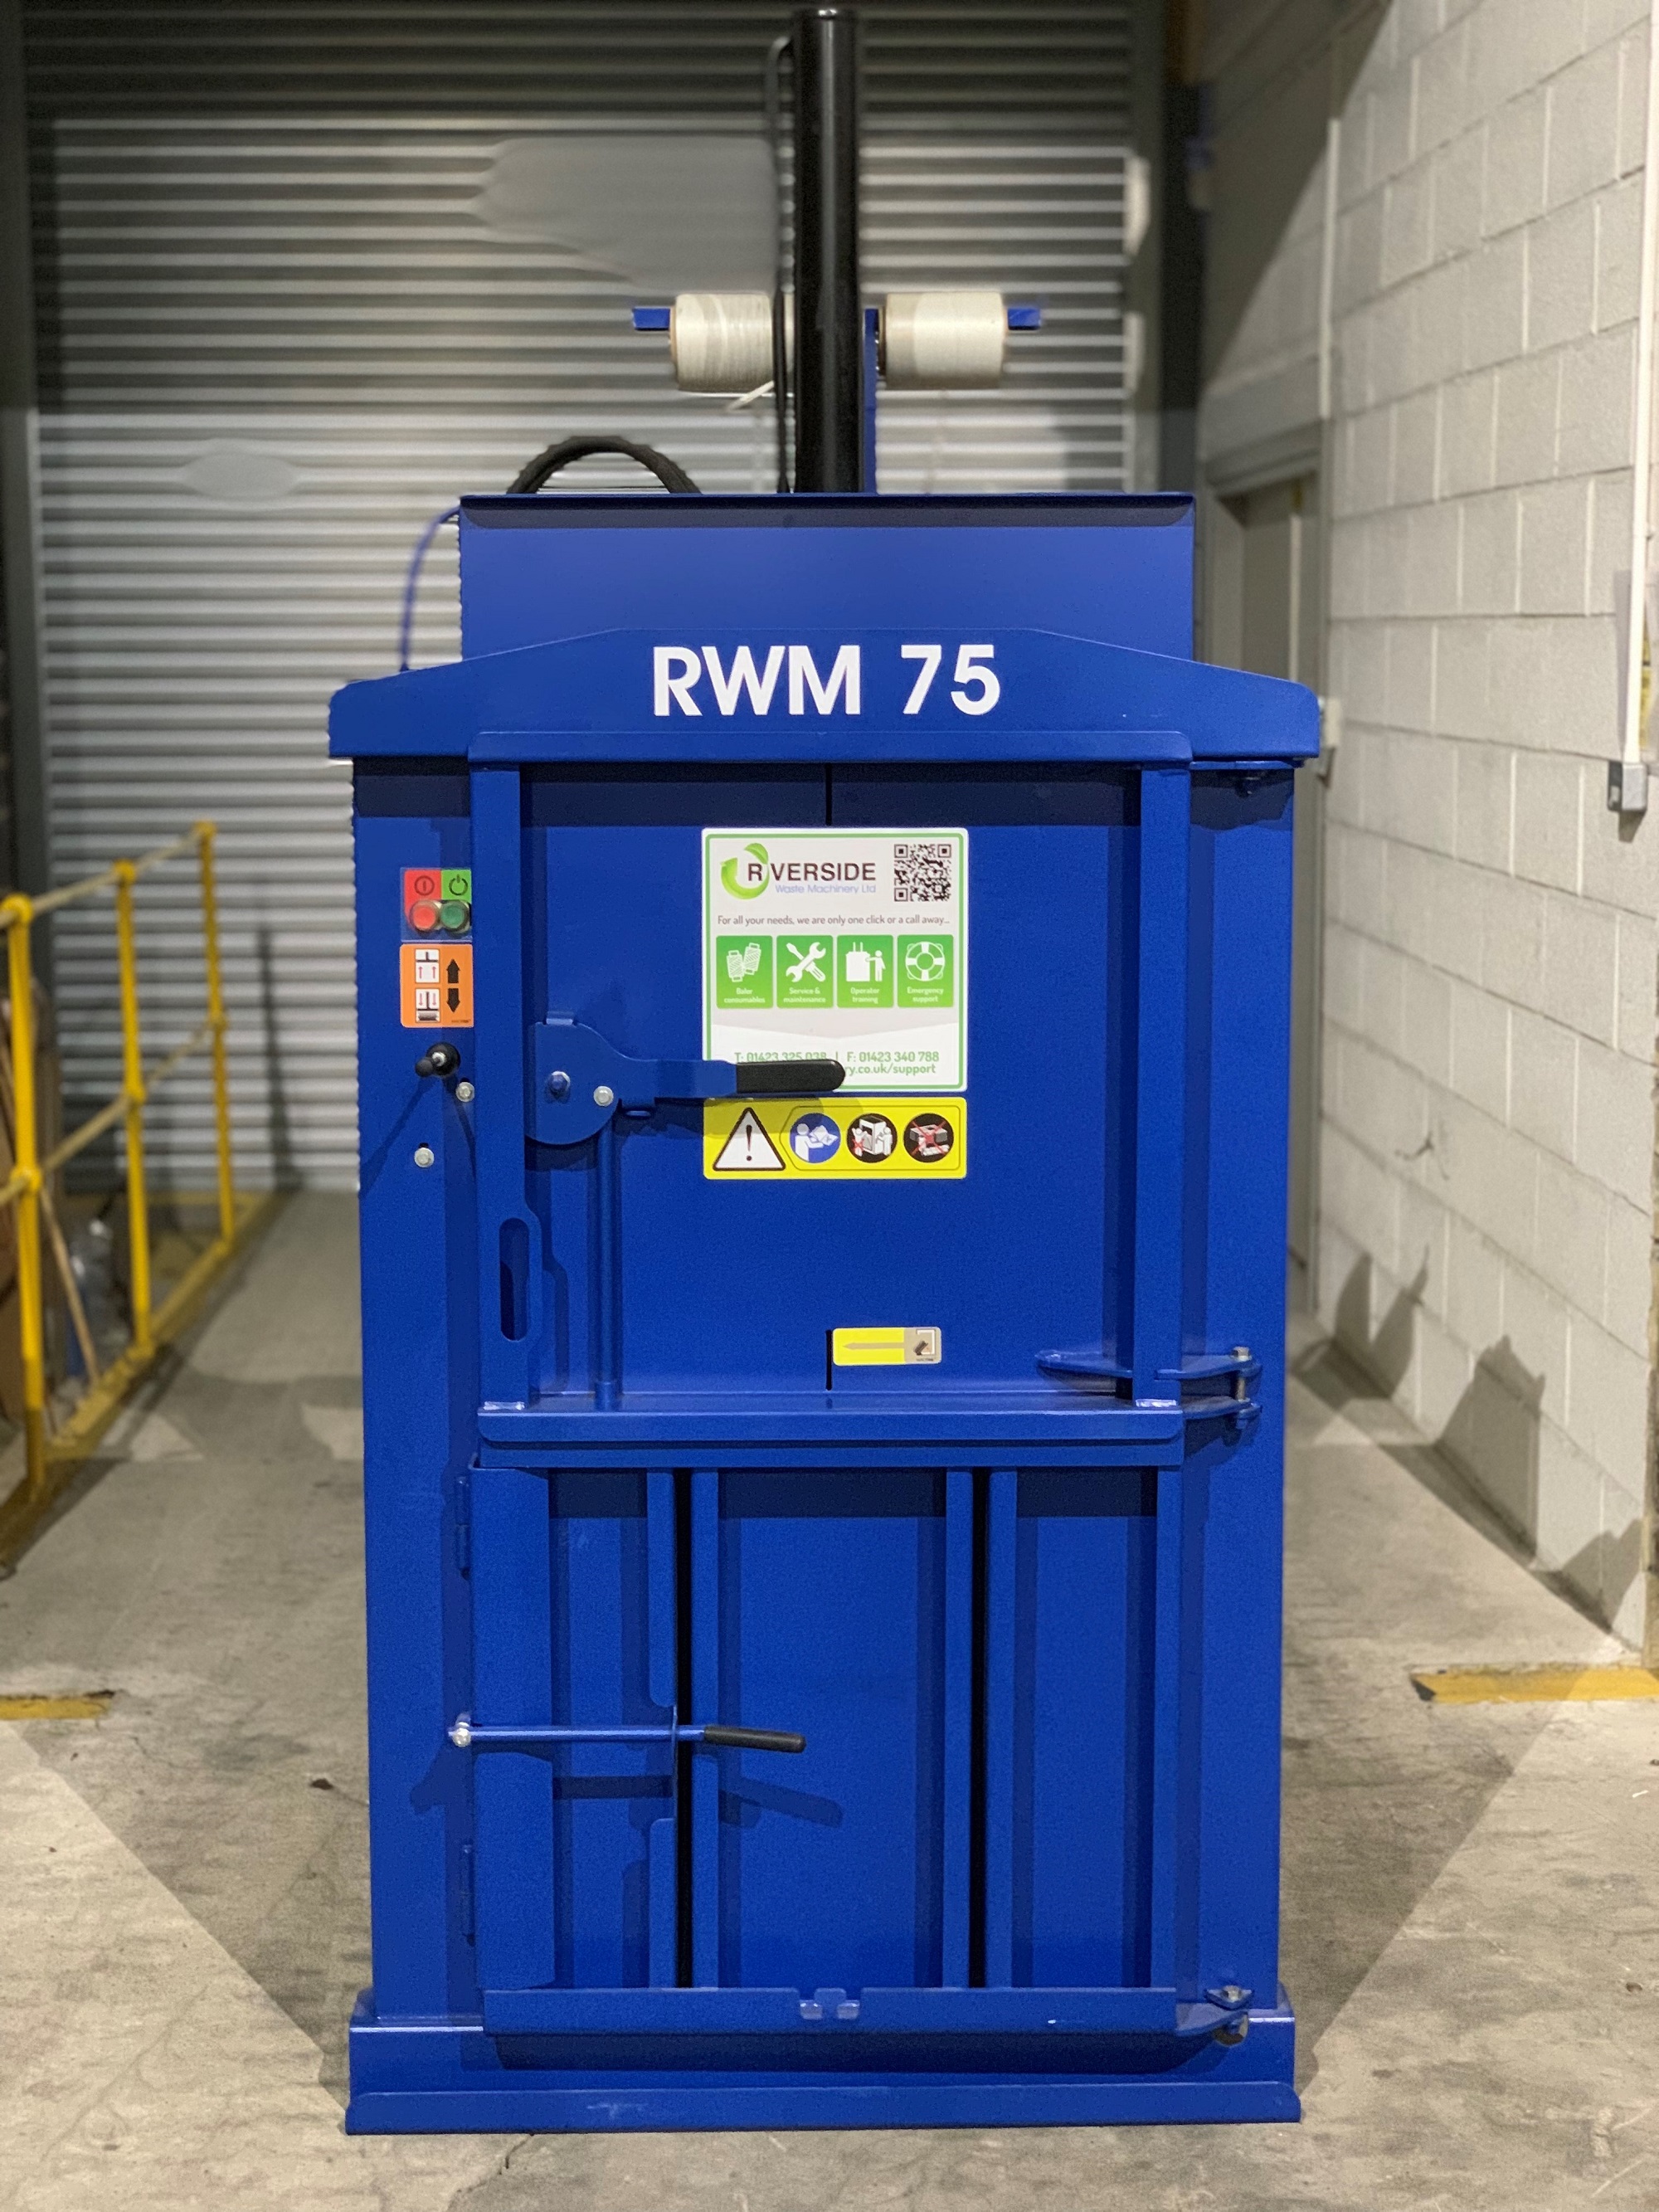 Excellent condition compact waste baler (RWM75)